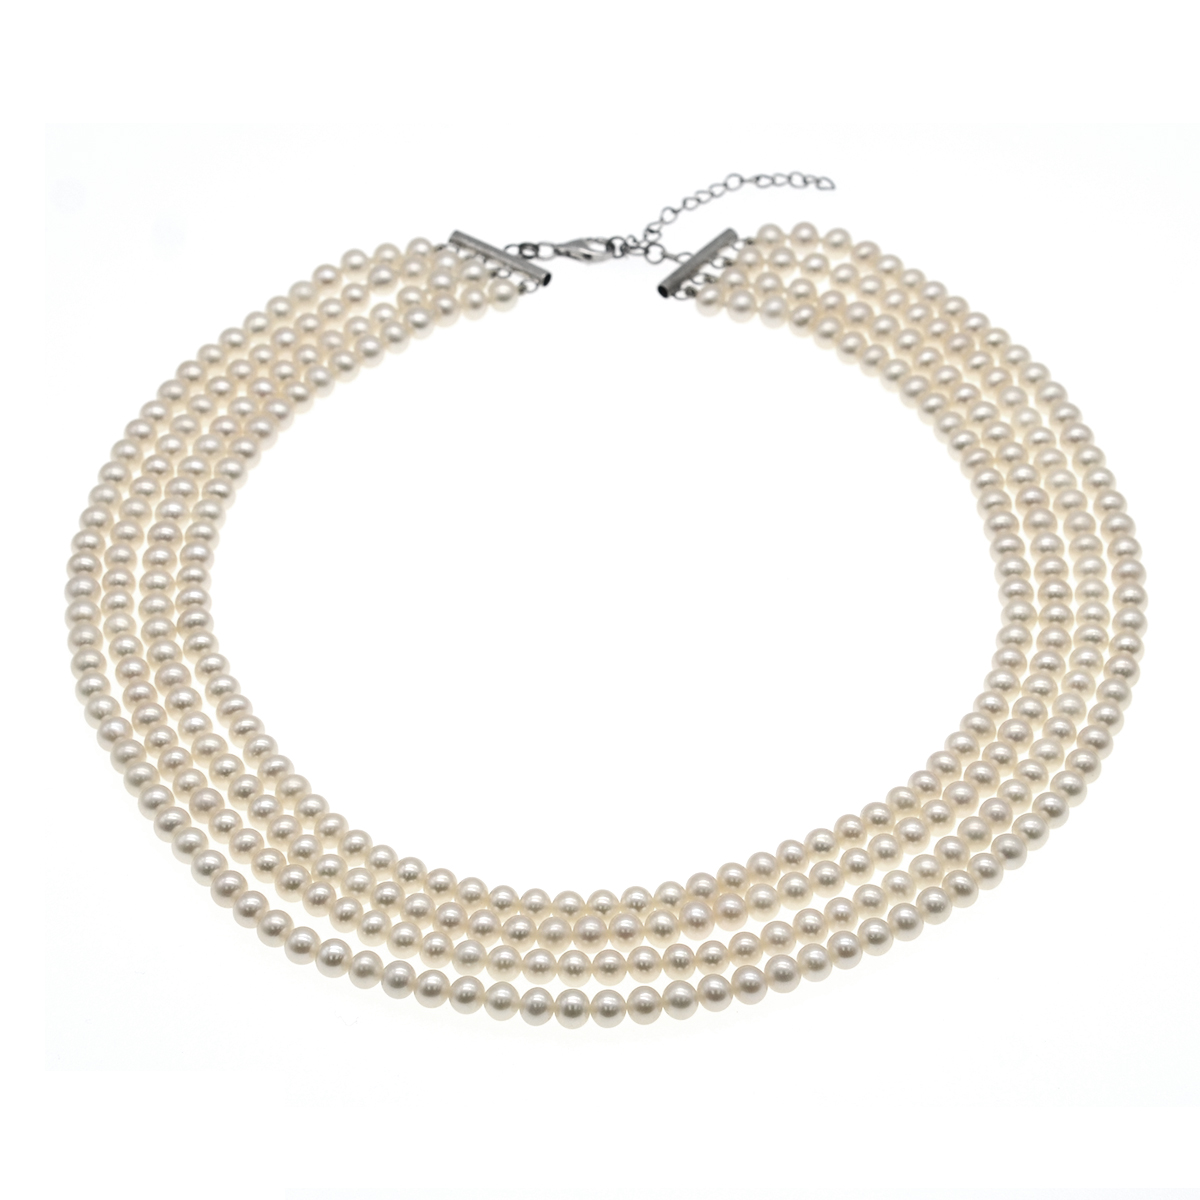 5-6mm Freshwater Pearl with 925 Silver Clasp 4 Rows Necklace